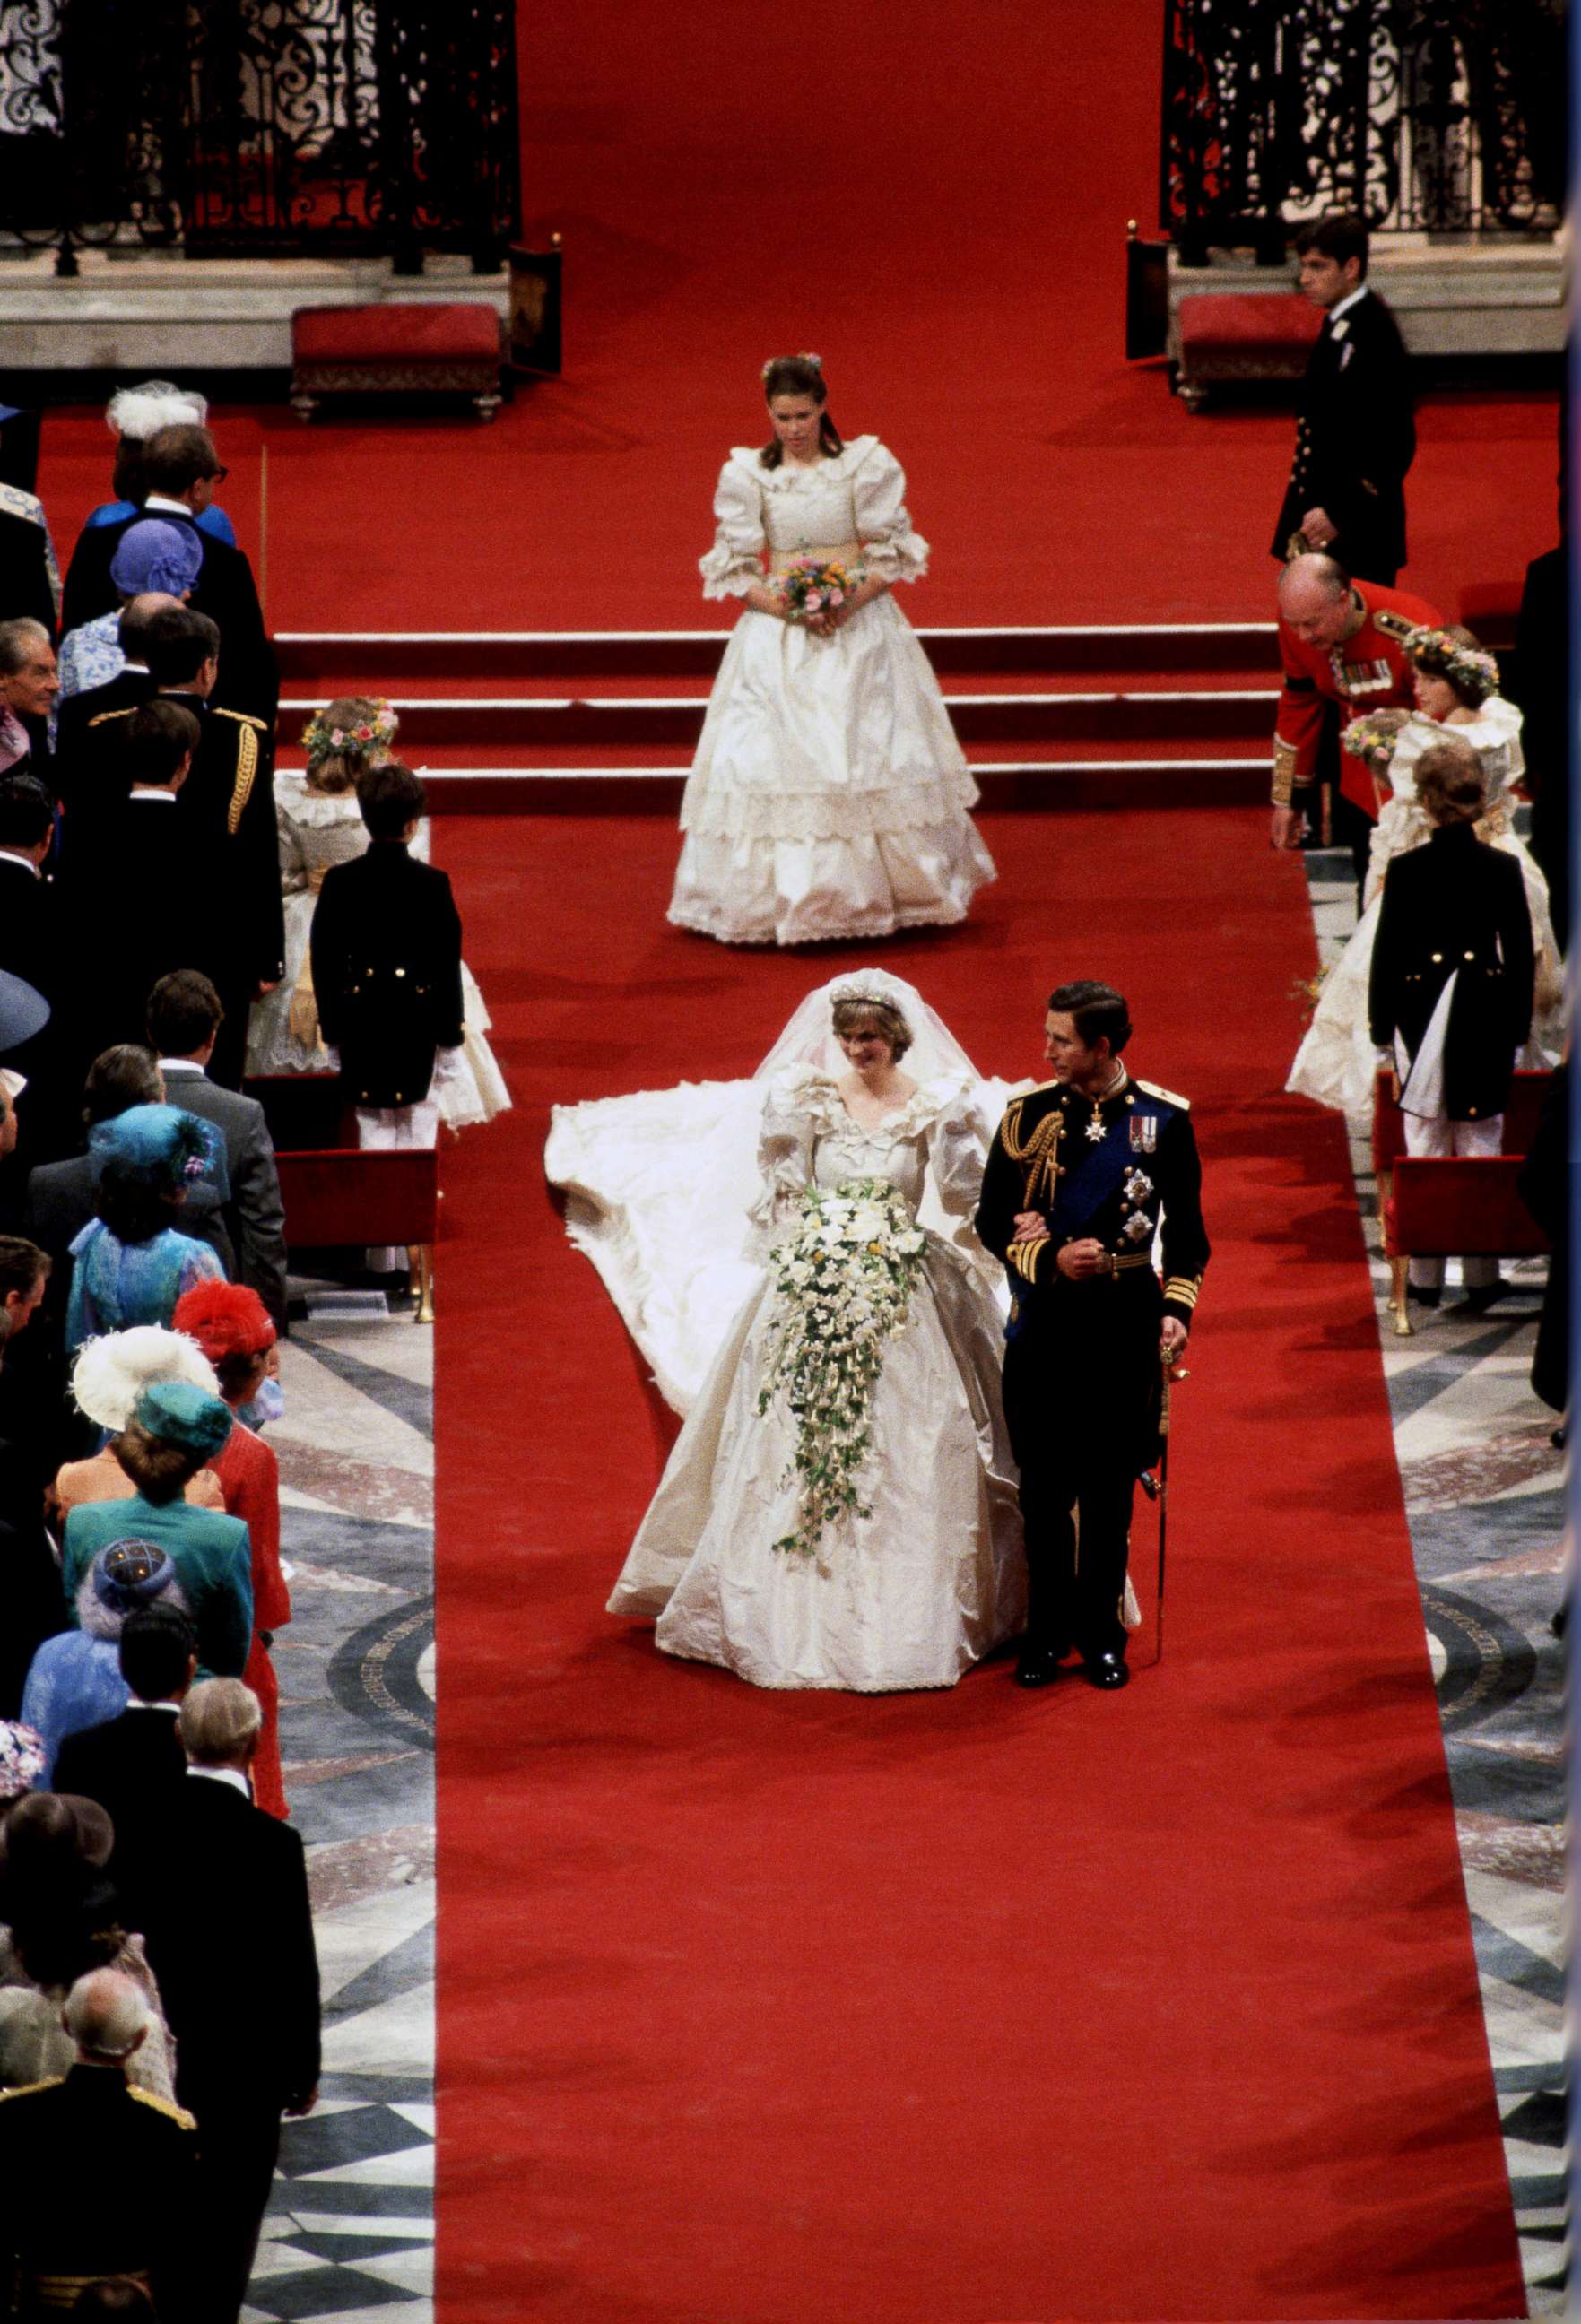 PHOTO: Diana, Princess of Wales and Prince Charles, Prince of Wales on their wedding day at St Paul's Cathedral, July 29, 1981.